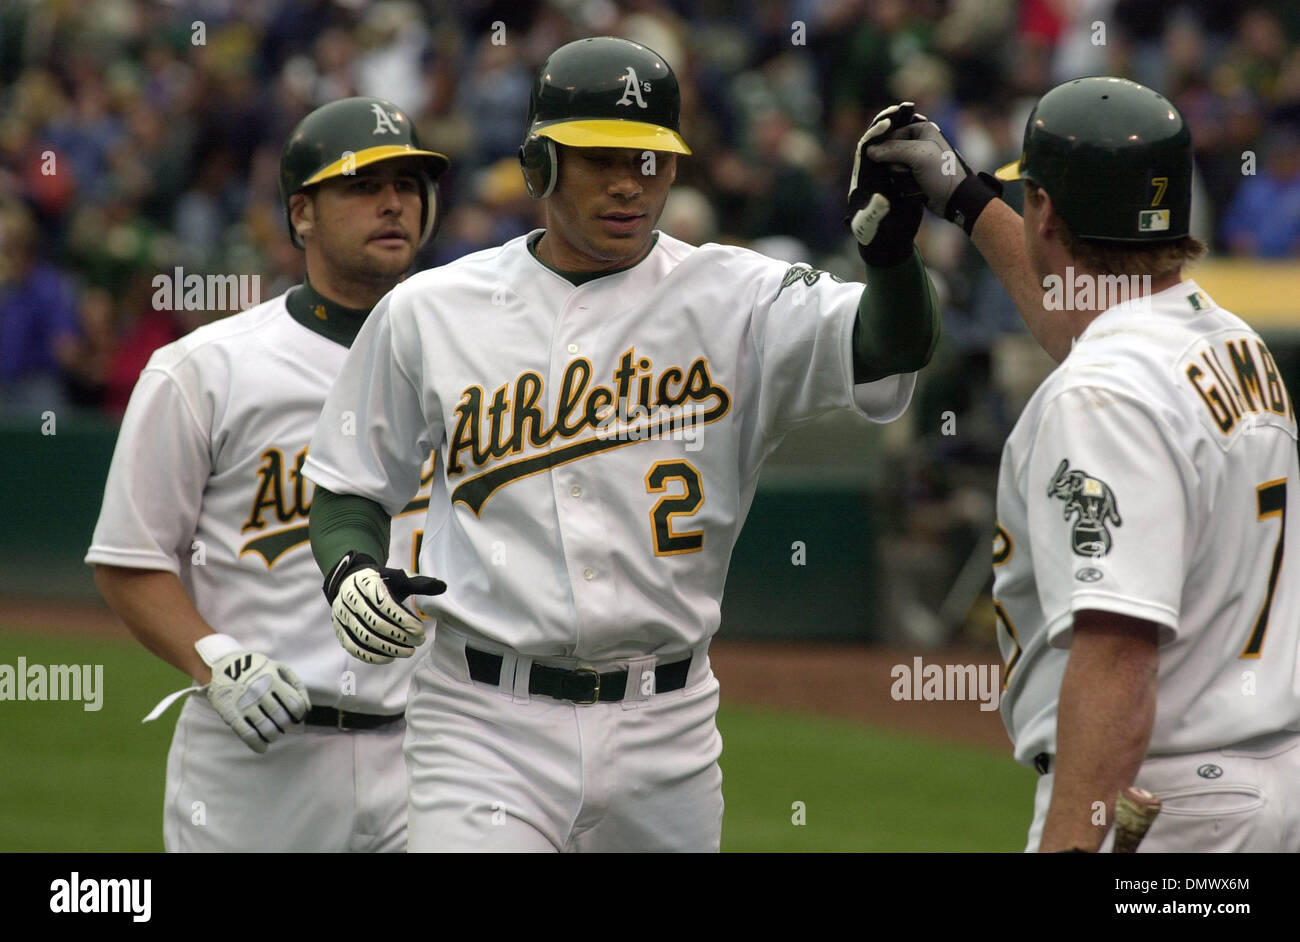 Apr 04, 2002; Oakland, CA, USA; A's Carlos Pena #2 is congratulated at home by next at bat Jeremy Giambi, right,  after Pena hit a 3 run home run in the 9th inning bringing home Olmedo Saenz and Ramon Hernandez making the score 5-7 at Networks Associate Colisium in Oakland, Calif. Thursday April 4, 2002. The Rangers beat the A's 7-5 with the Rangers scoring 5 runs in the sixth inni Stock Photo